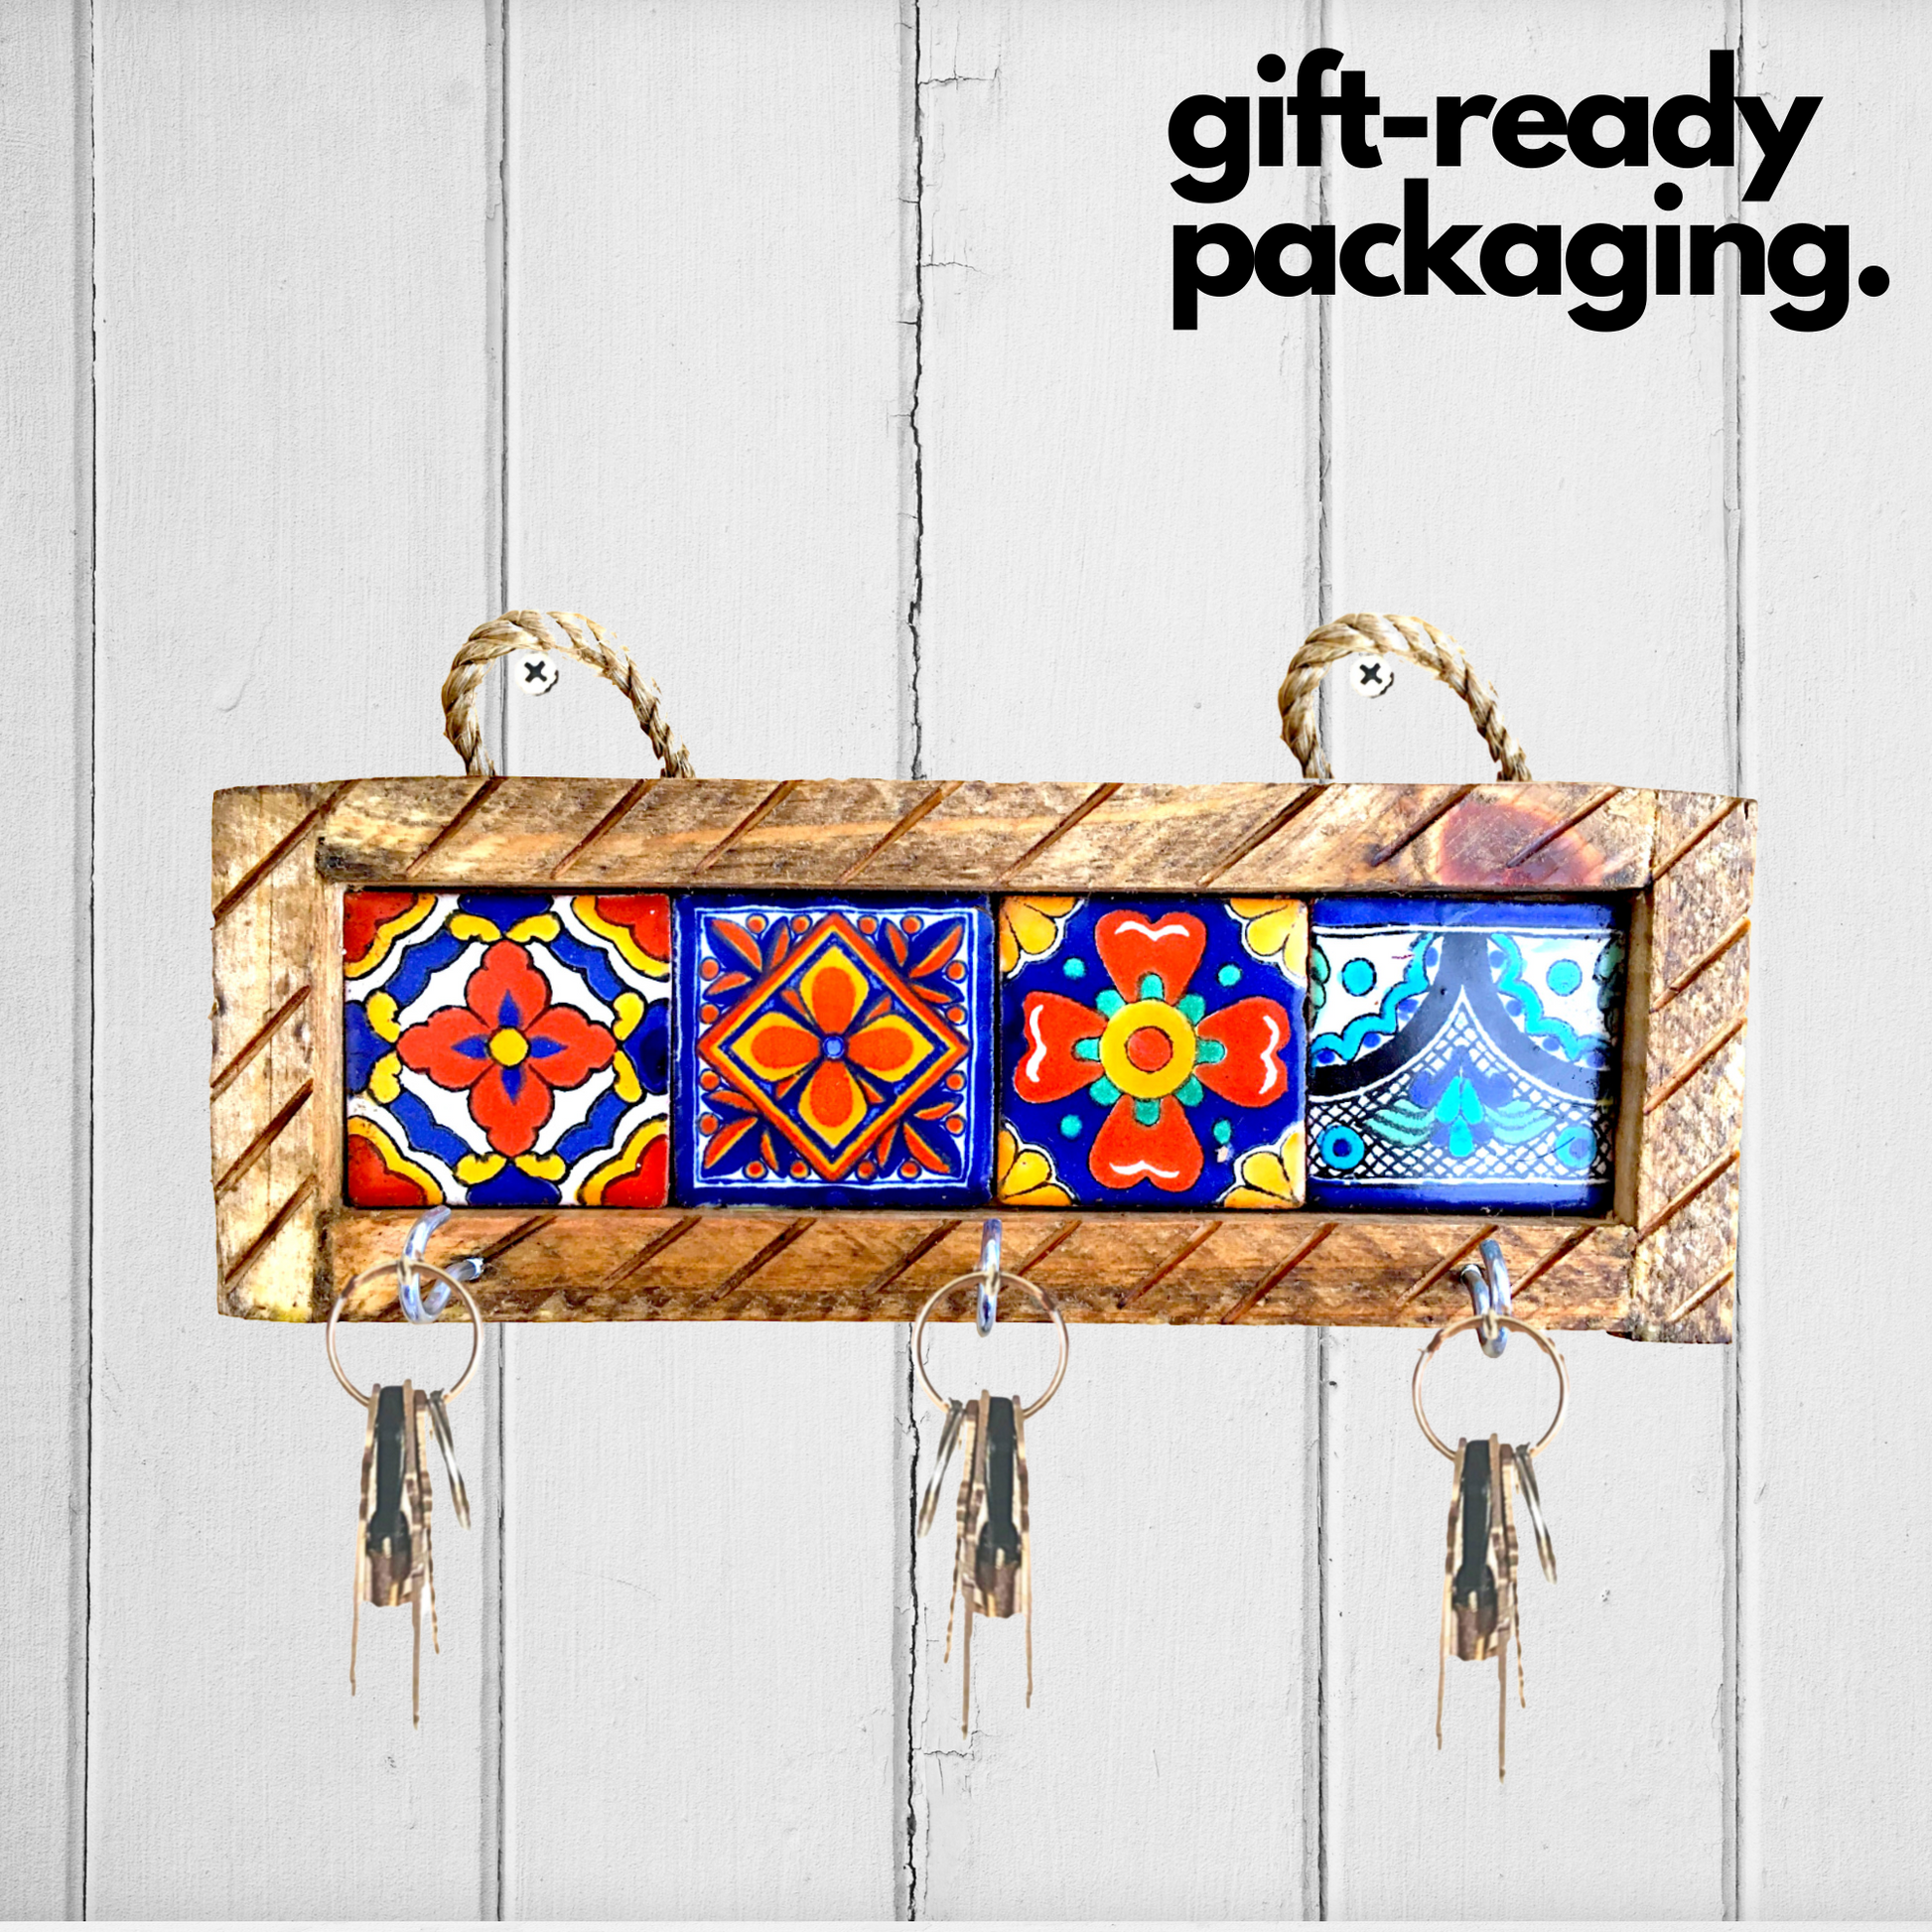 gift-ready packaging Handmade Mexican Talavera Tiles Key Holder, perfect for key organization and for adding vibrant Mexican style to your home.